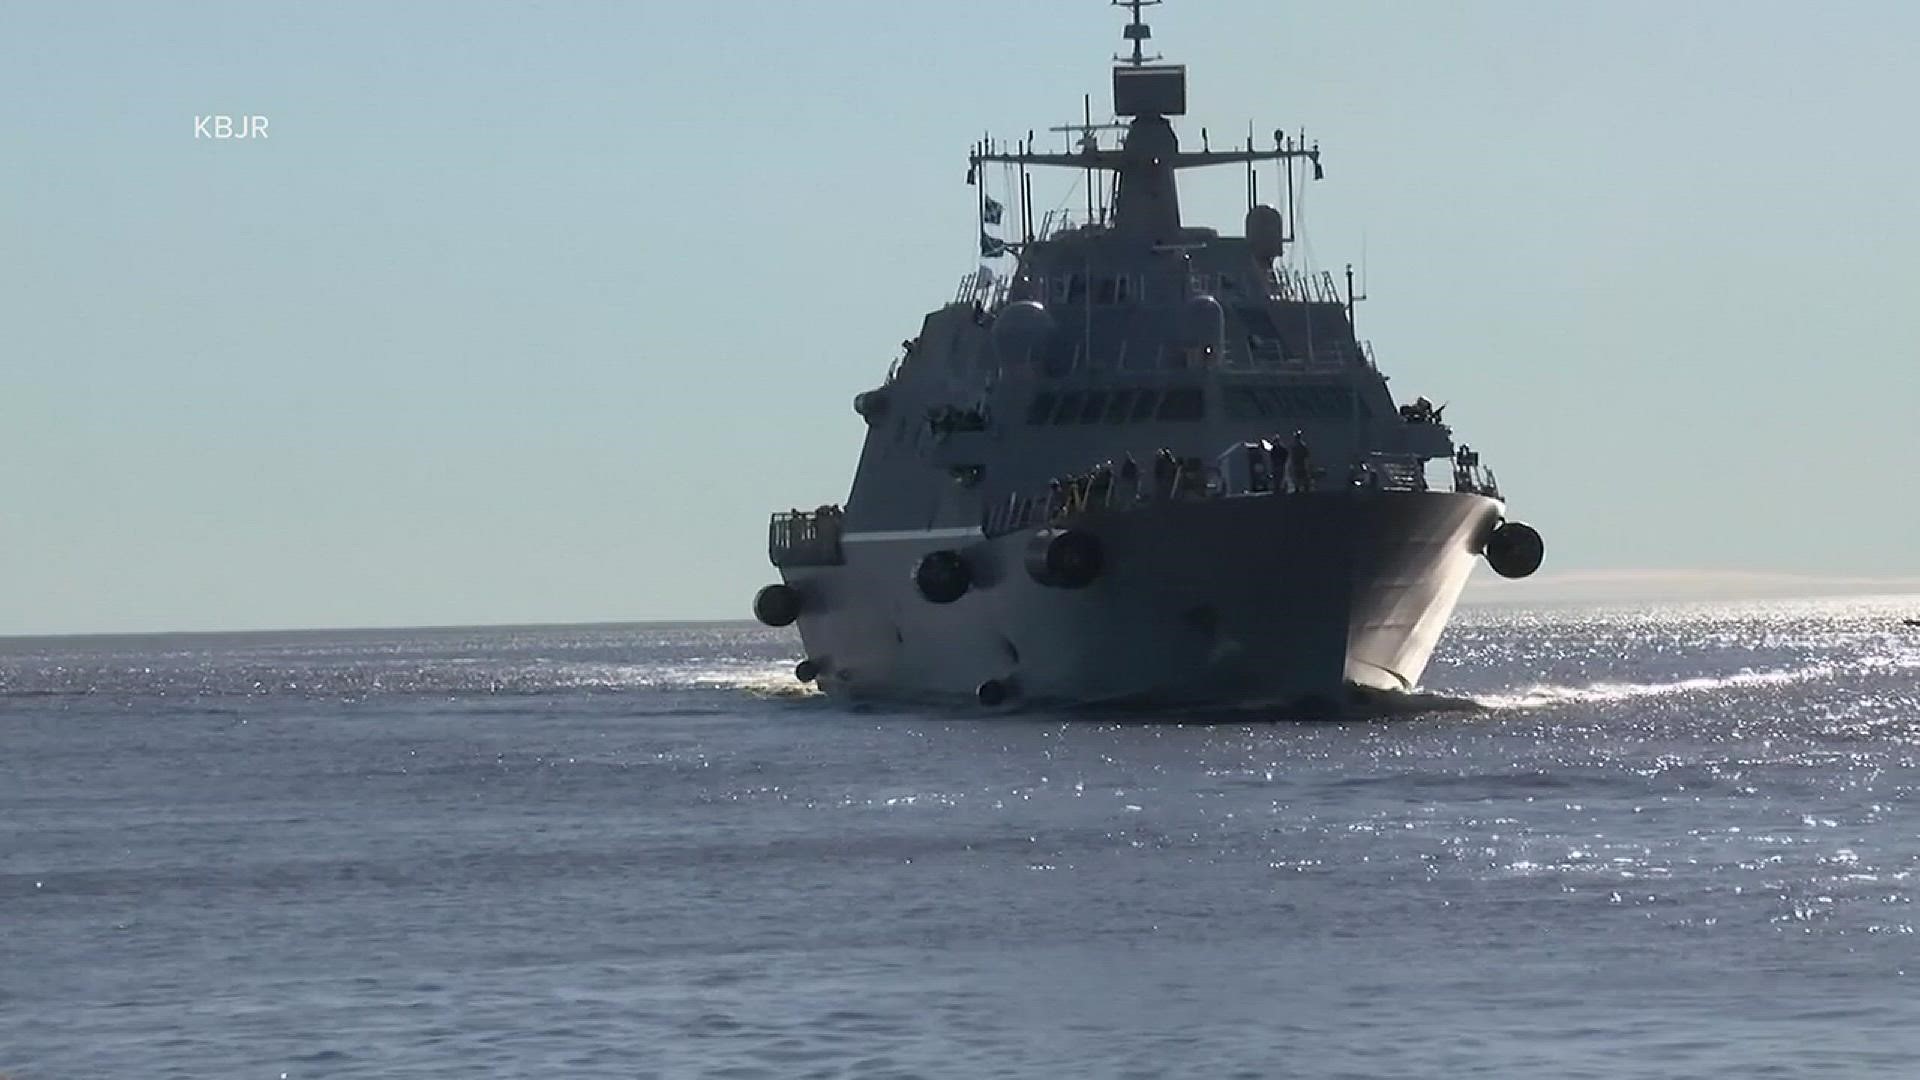 First launched in 2019, the USS Minneapolis-Saint Paul will be commissioned in Duluth on May 21, before moving to its home port at Naval Station Mayport in Florida.